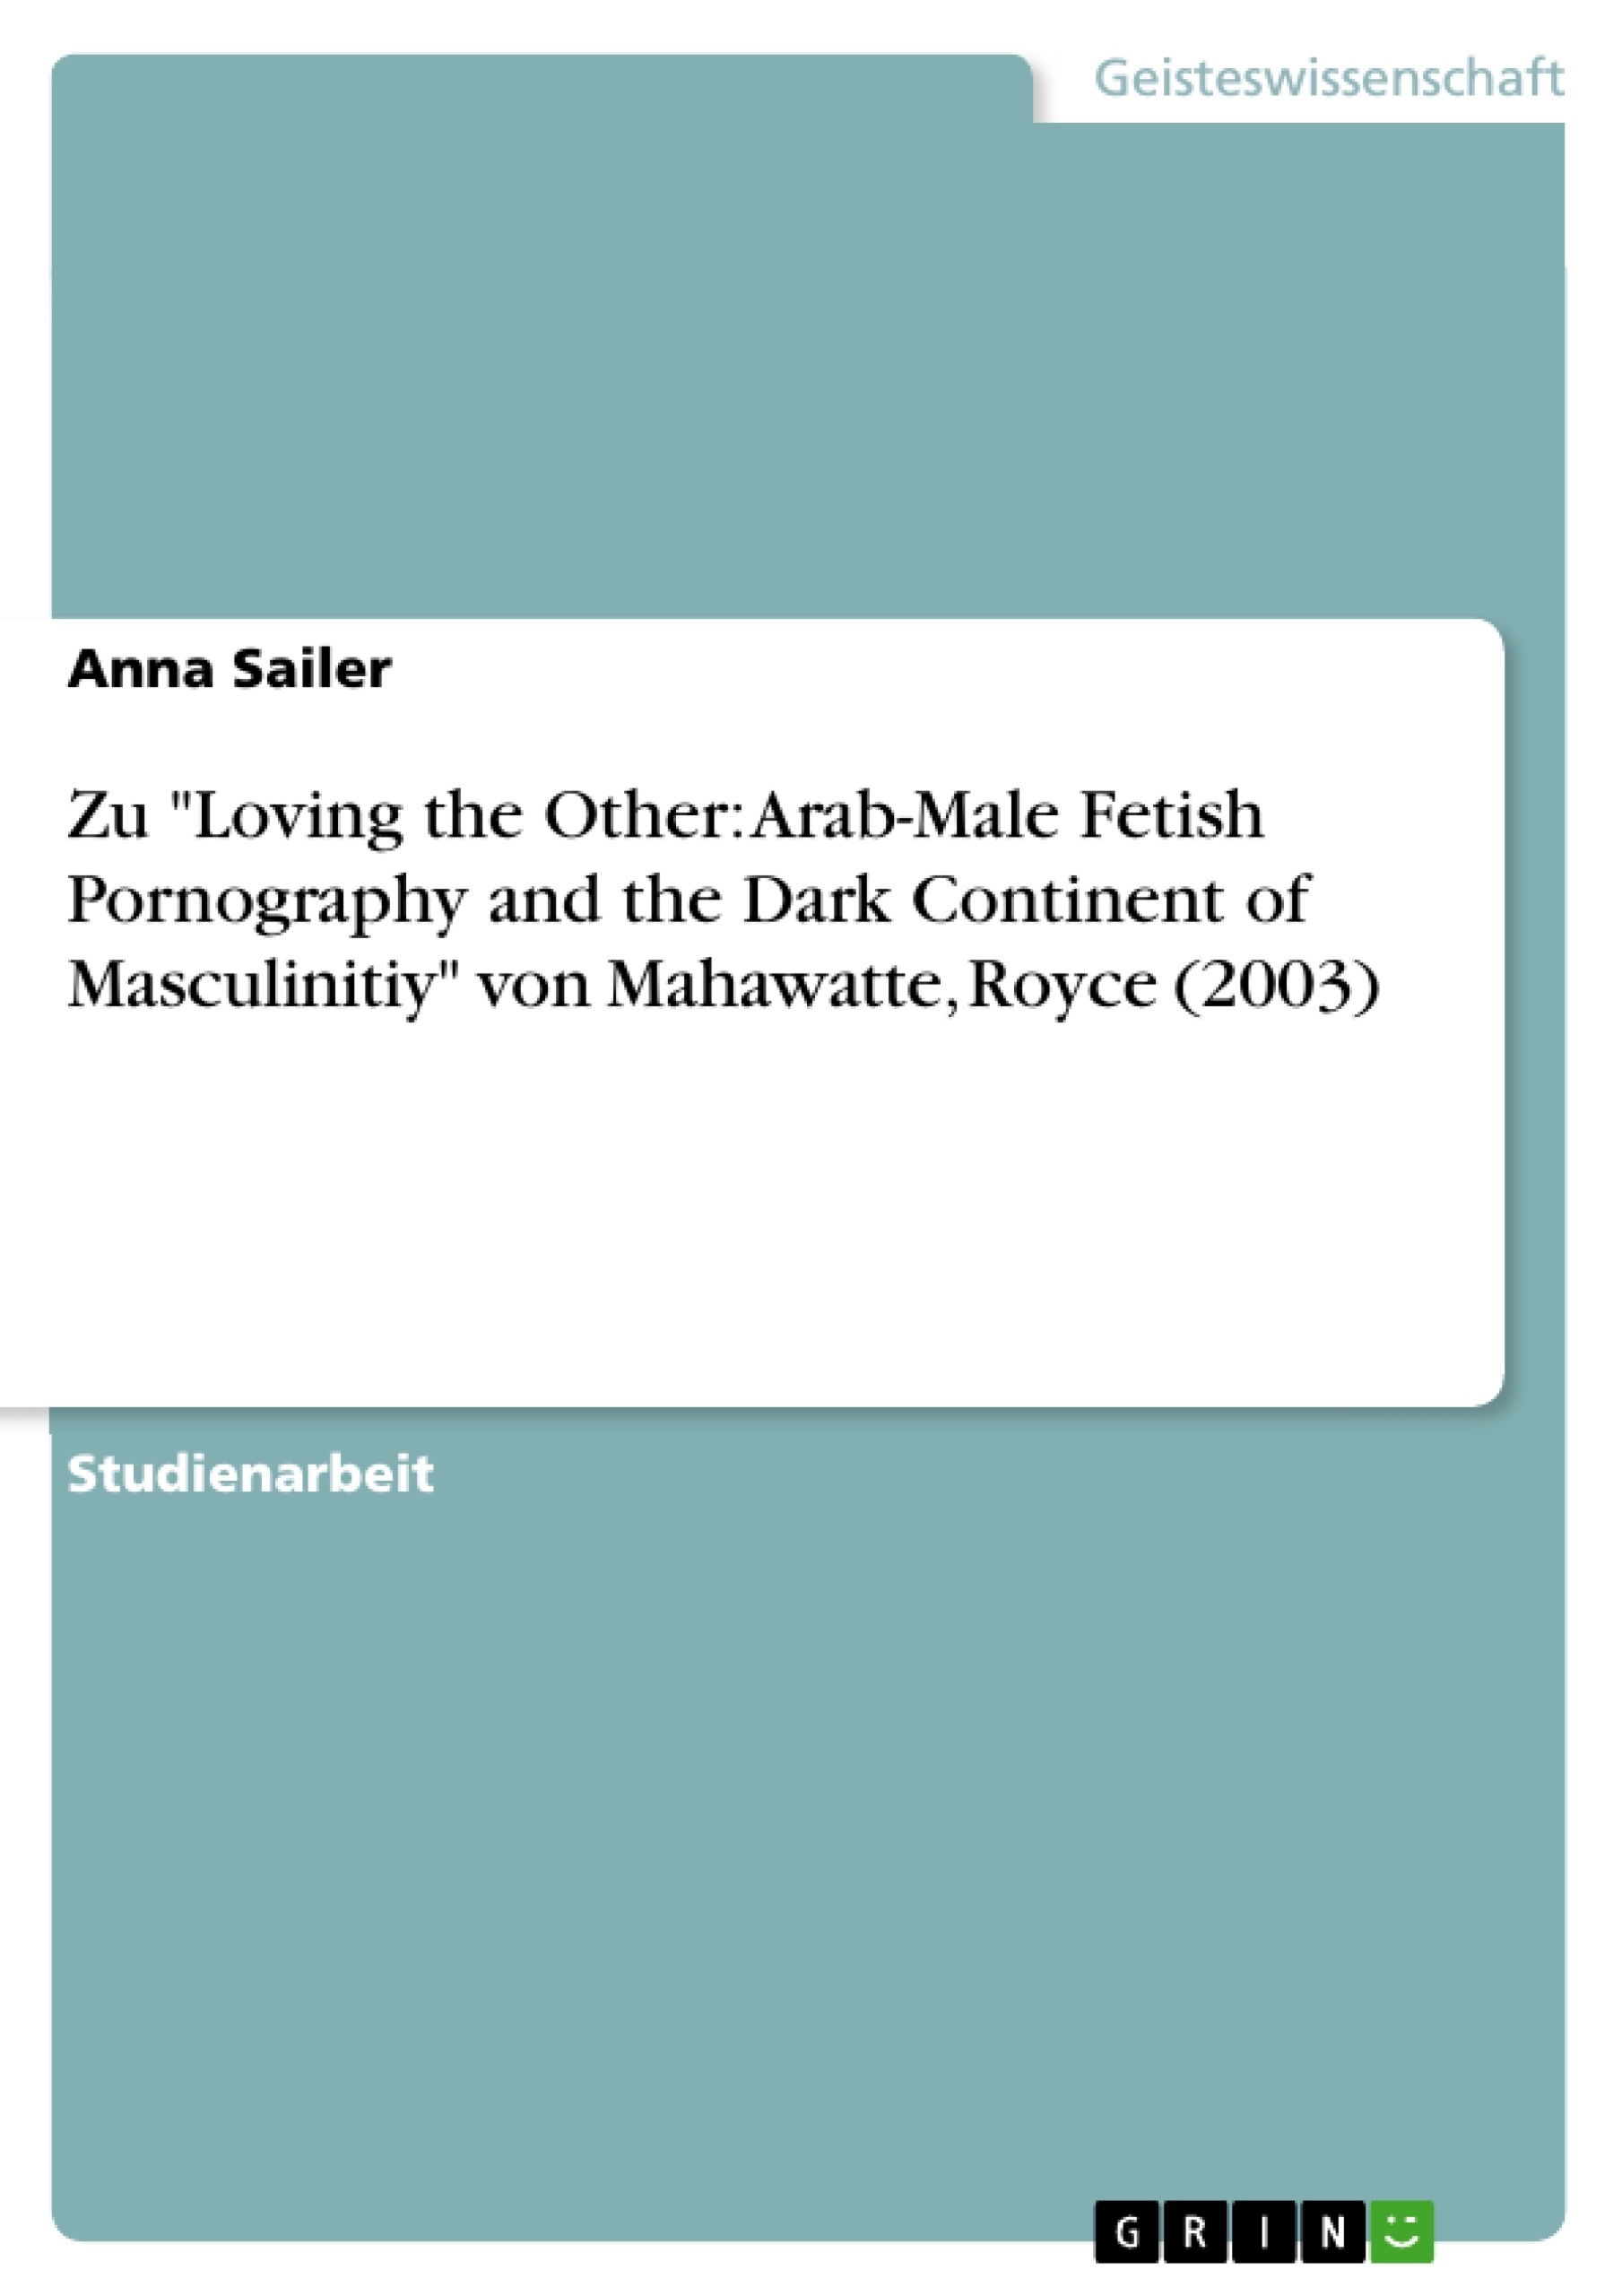 Titre: Zu "Loving the Other: Arab-Male Fetish Pornography and the Dark Continent of Masculinitiy" von Mahawatte, Royce (2003)